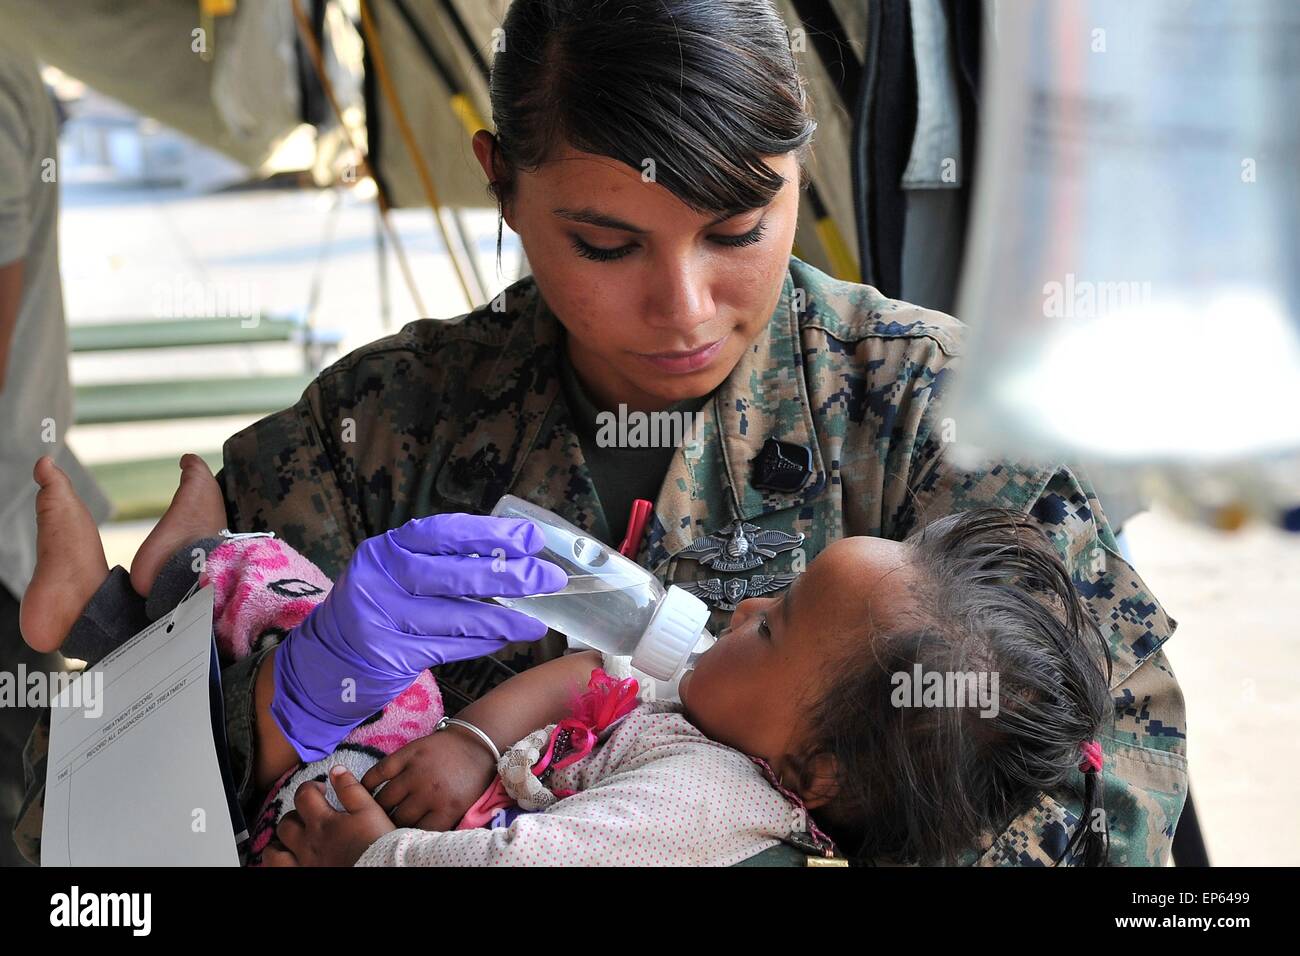 Kathmandu, Nepal. 13th May, 2015. U.S. Navy Petty Officer 2nd Class Jessica Gomez-Hickman, Marine Light Attack Helicopter Squadron 469 corpsman and Carey, Idaho, native, comforts an infant earthquake victim at the Tribhuvan International Airport in Kathmandu, Nepal, May 12. Joint Task Force 505 members worked with the Nepalese army to triage, treat and transport patients after a 7.3 magnitude earthquake struck May 12 following a 7.8 magnitude earthquake that devastated Nepal April 25. Stock Photo